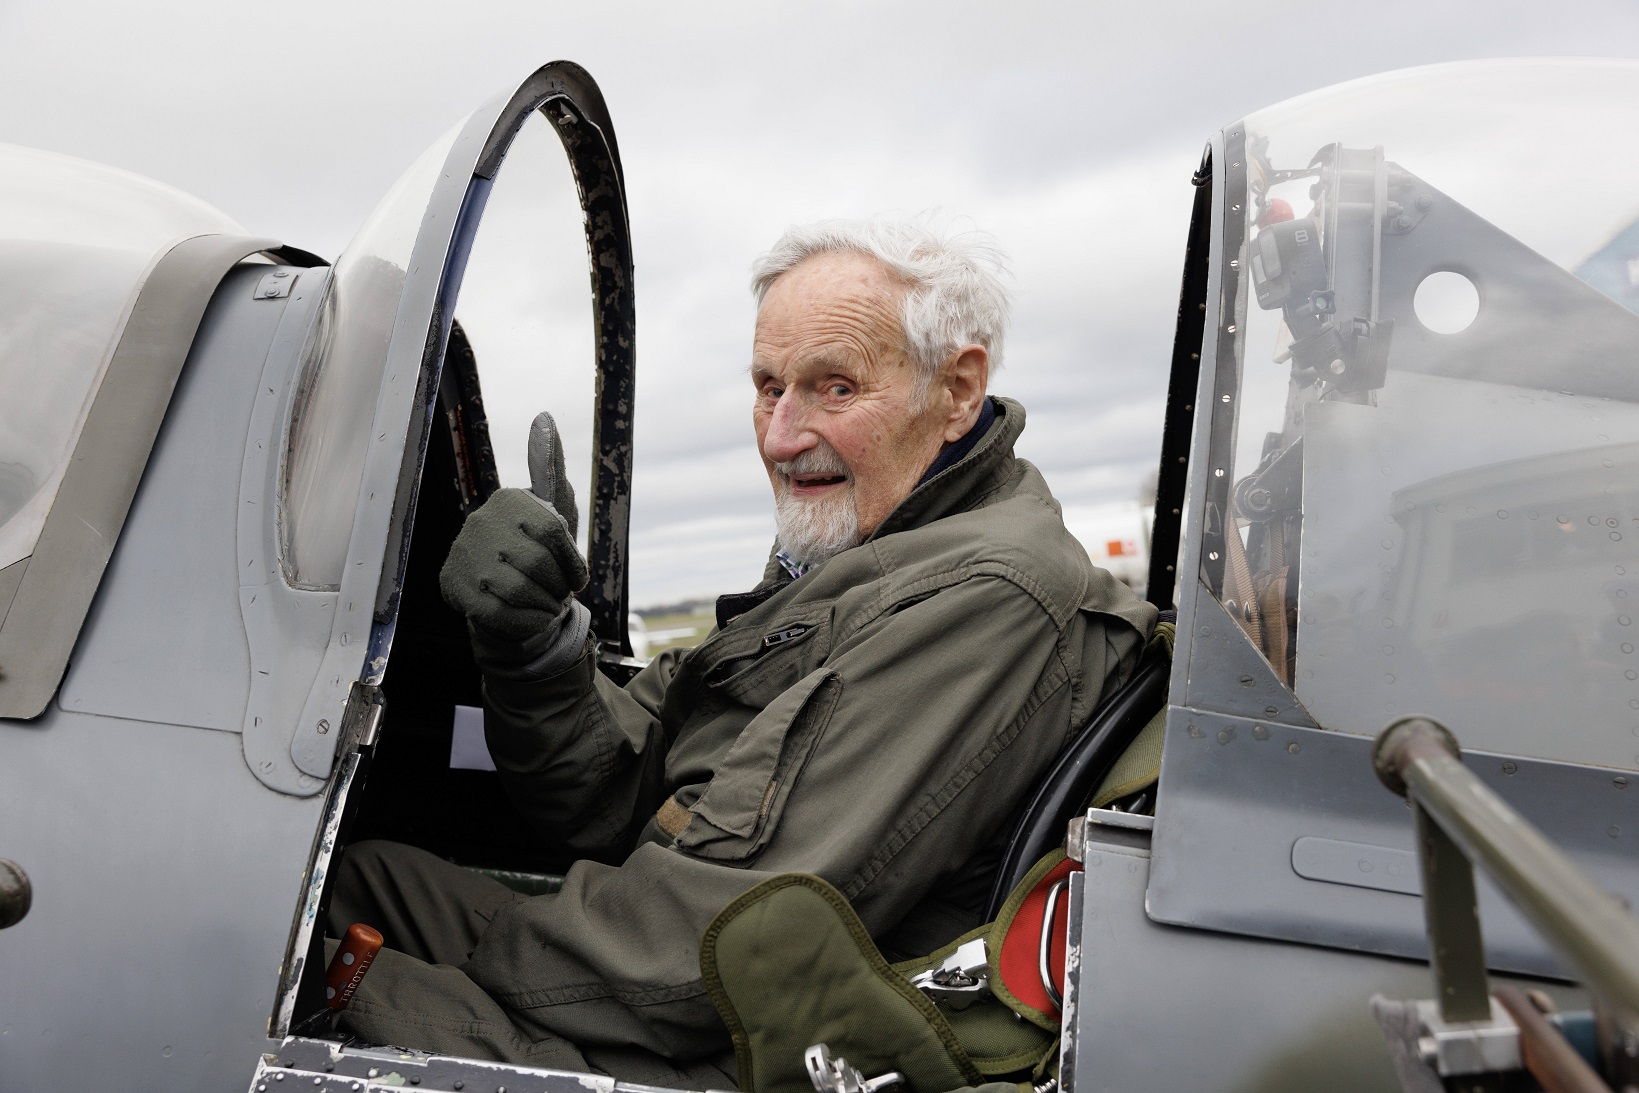 Jack Hemings AFC, a 102-year-old former RAF Squadron Leader, has become the oldest man to fly a Spitfire plane.